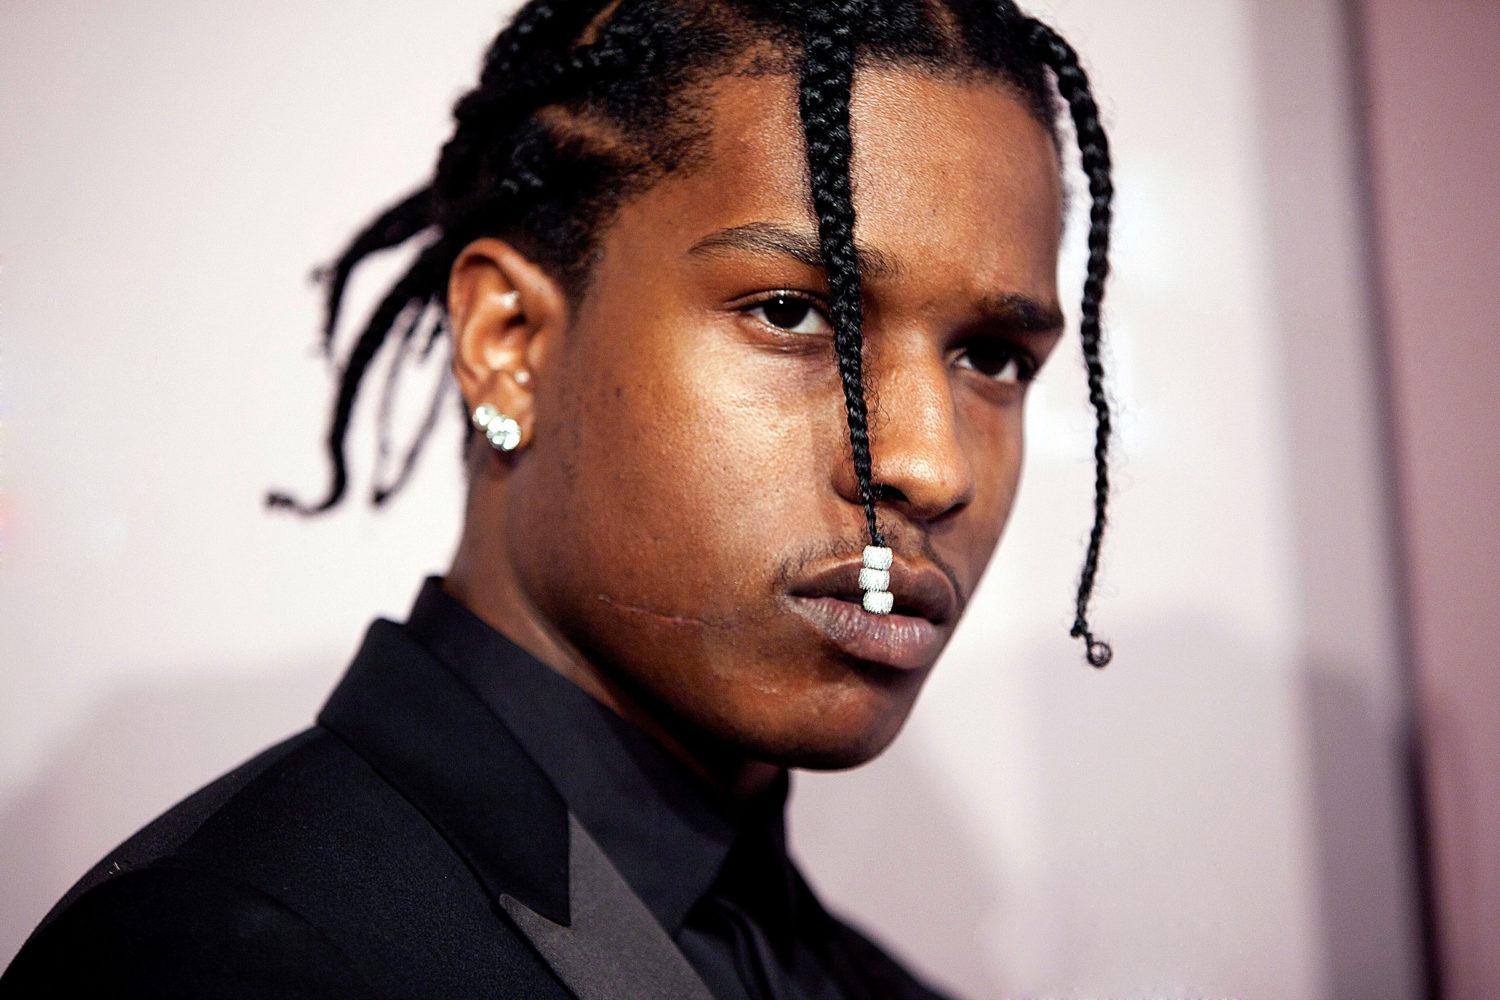 They squeezed the life out of it,' A$AP Rocky says he was sexually